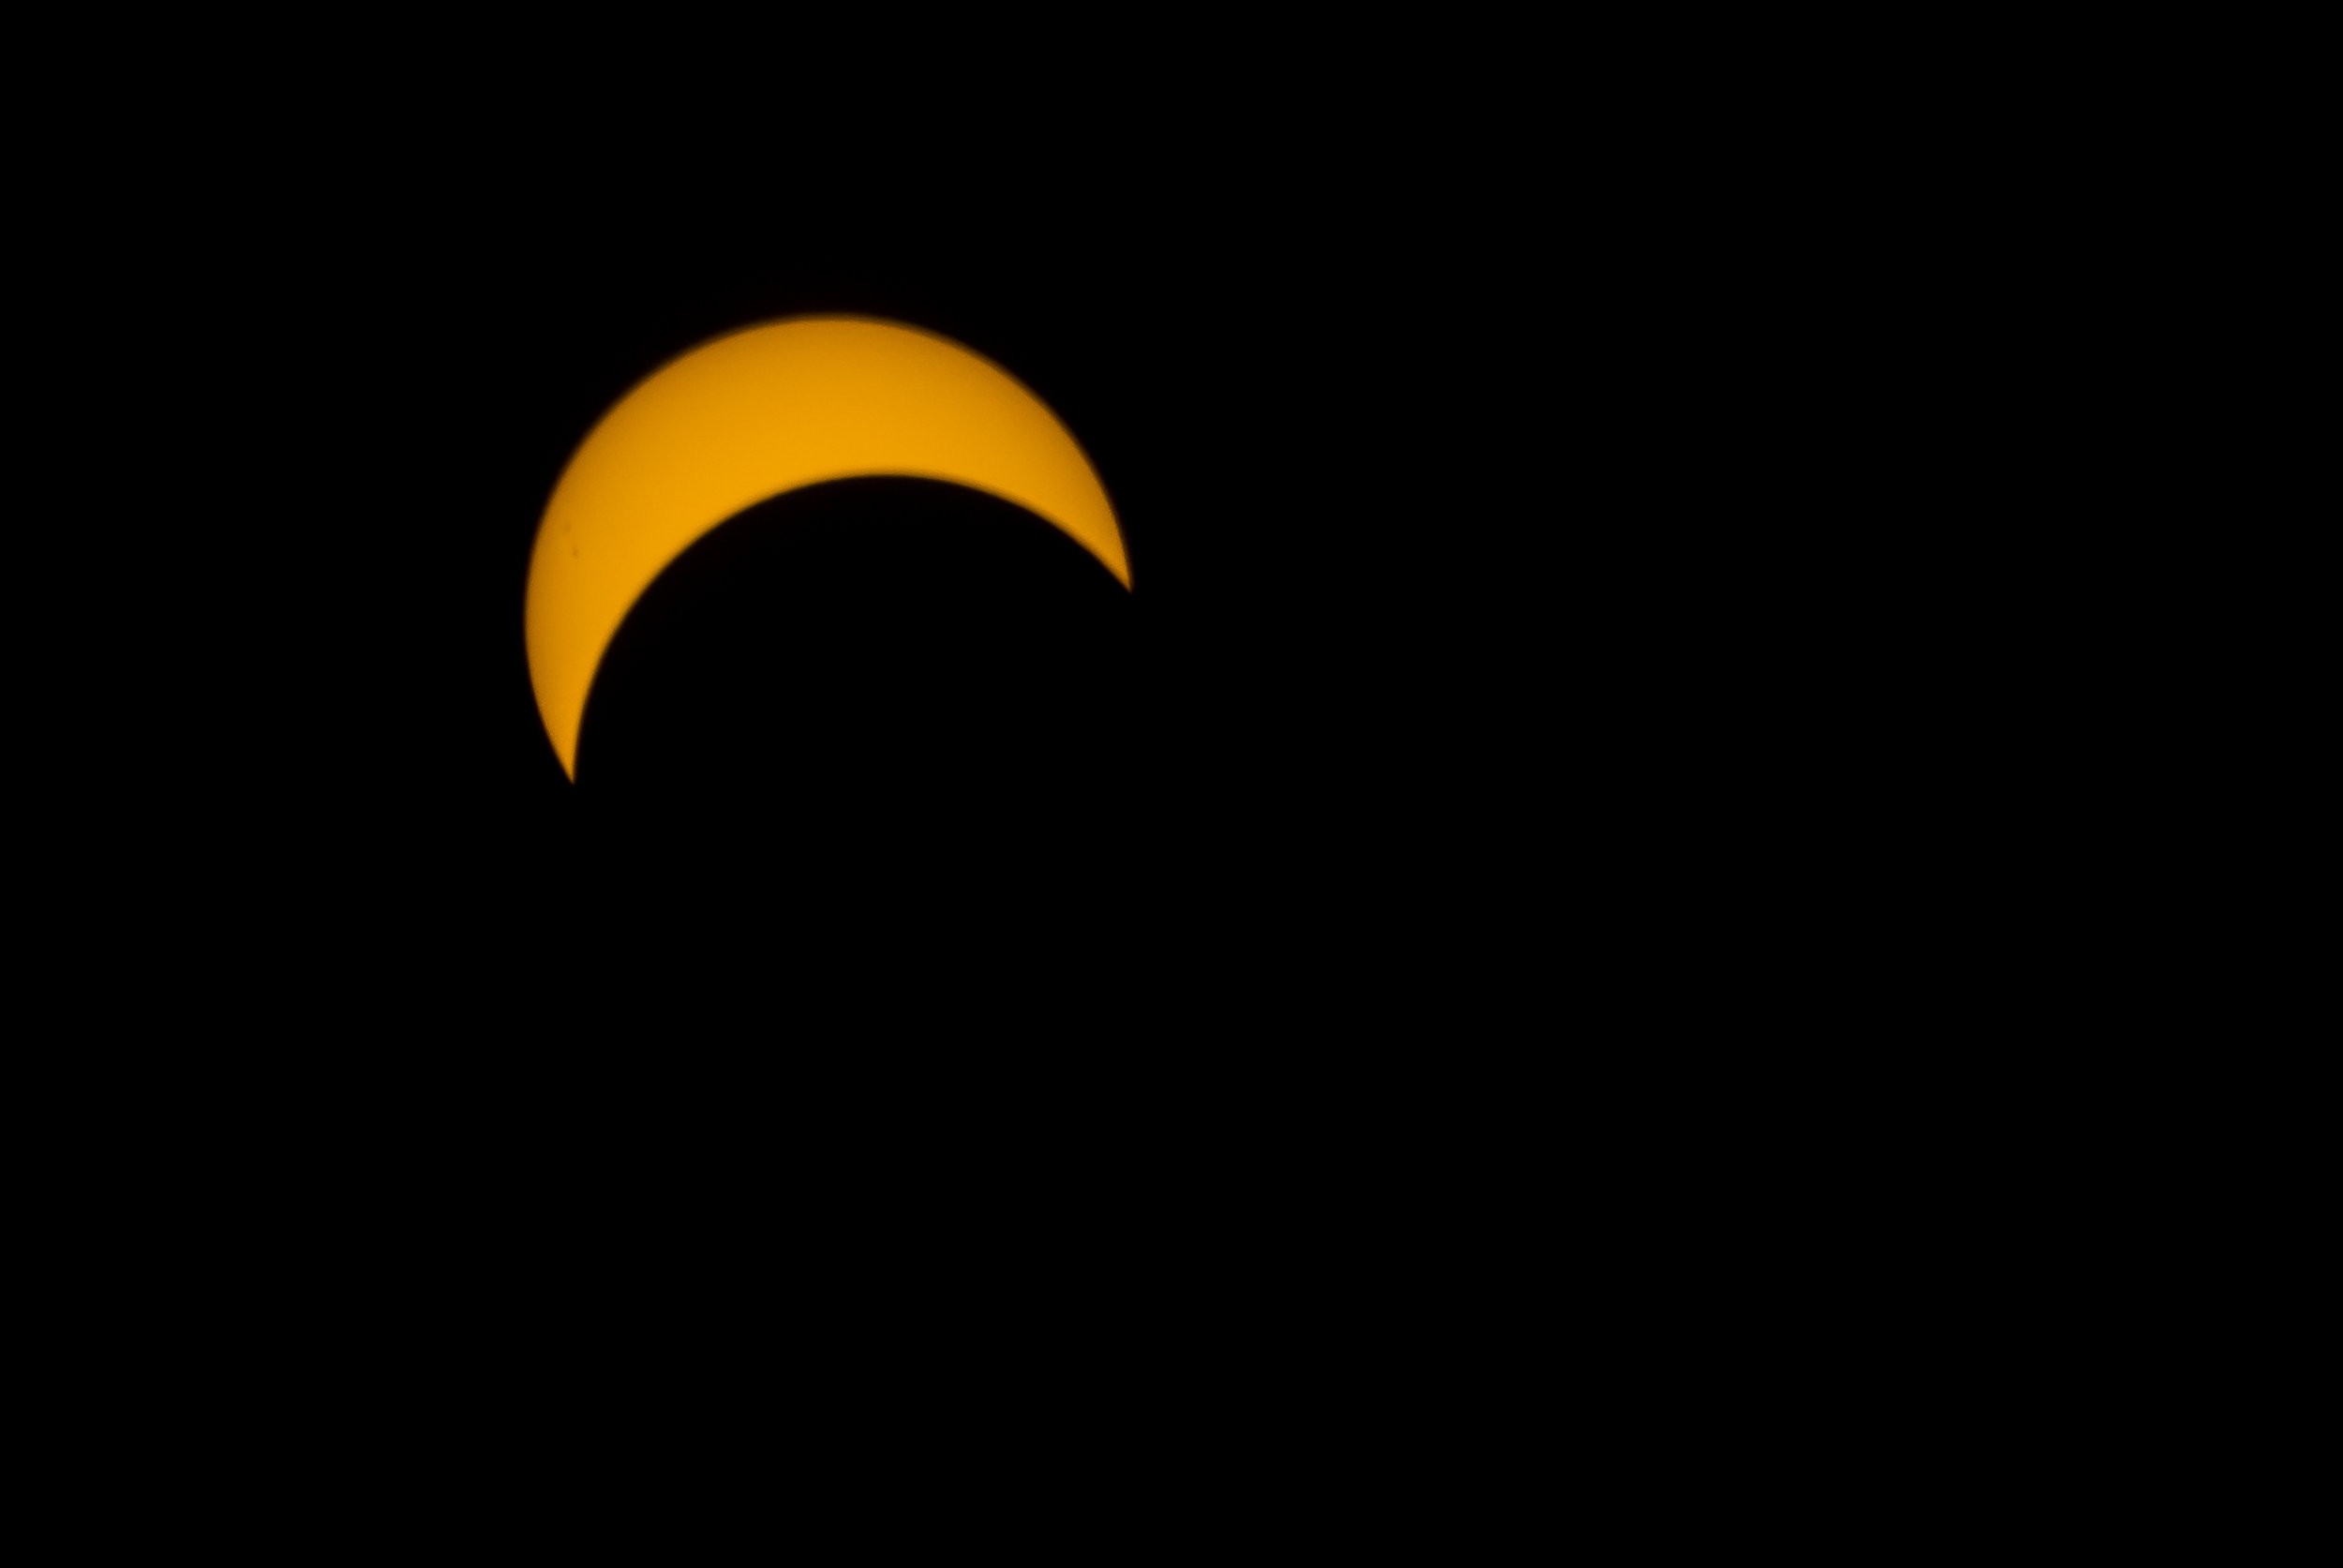  Matthew Scharkopf, of Huntington, took this photo of the solar eclipse at approximately 2:36 pm from his backyard off Lenox Road in Huntington Station. C opyright 2017 Matthew Scott Photography L.I. NY  